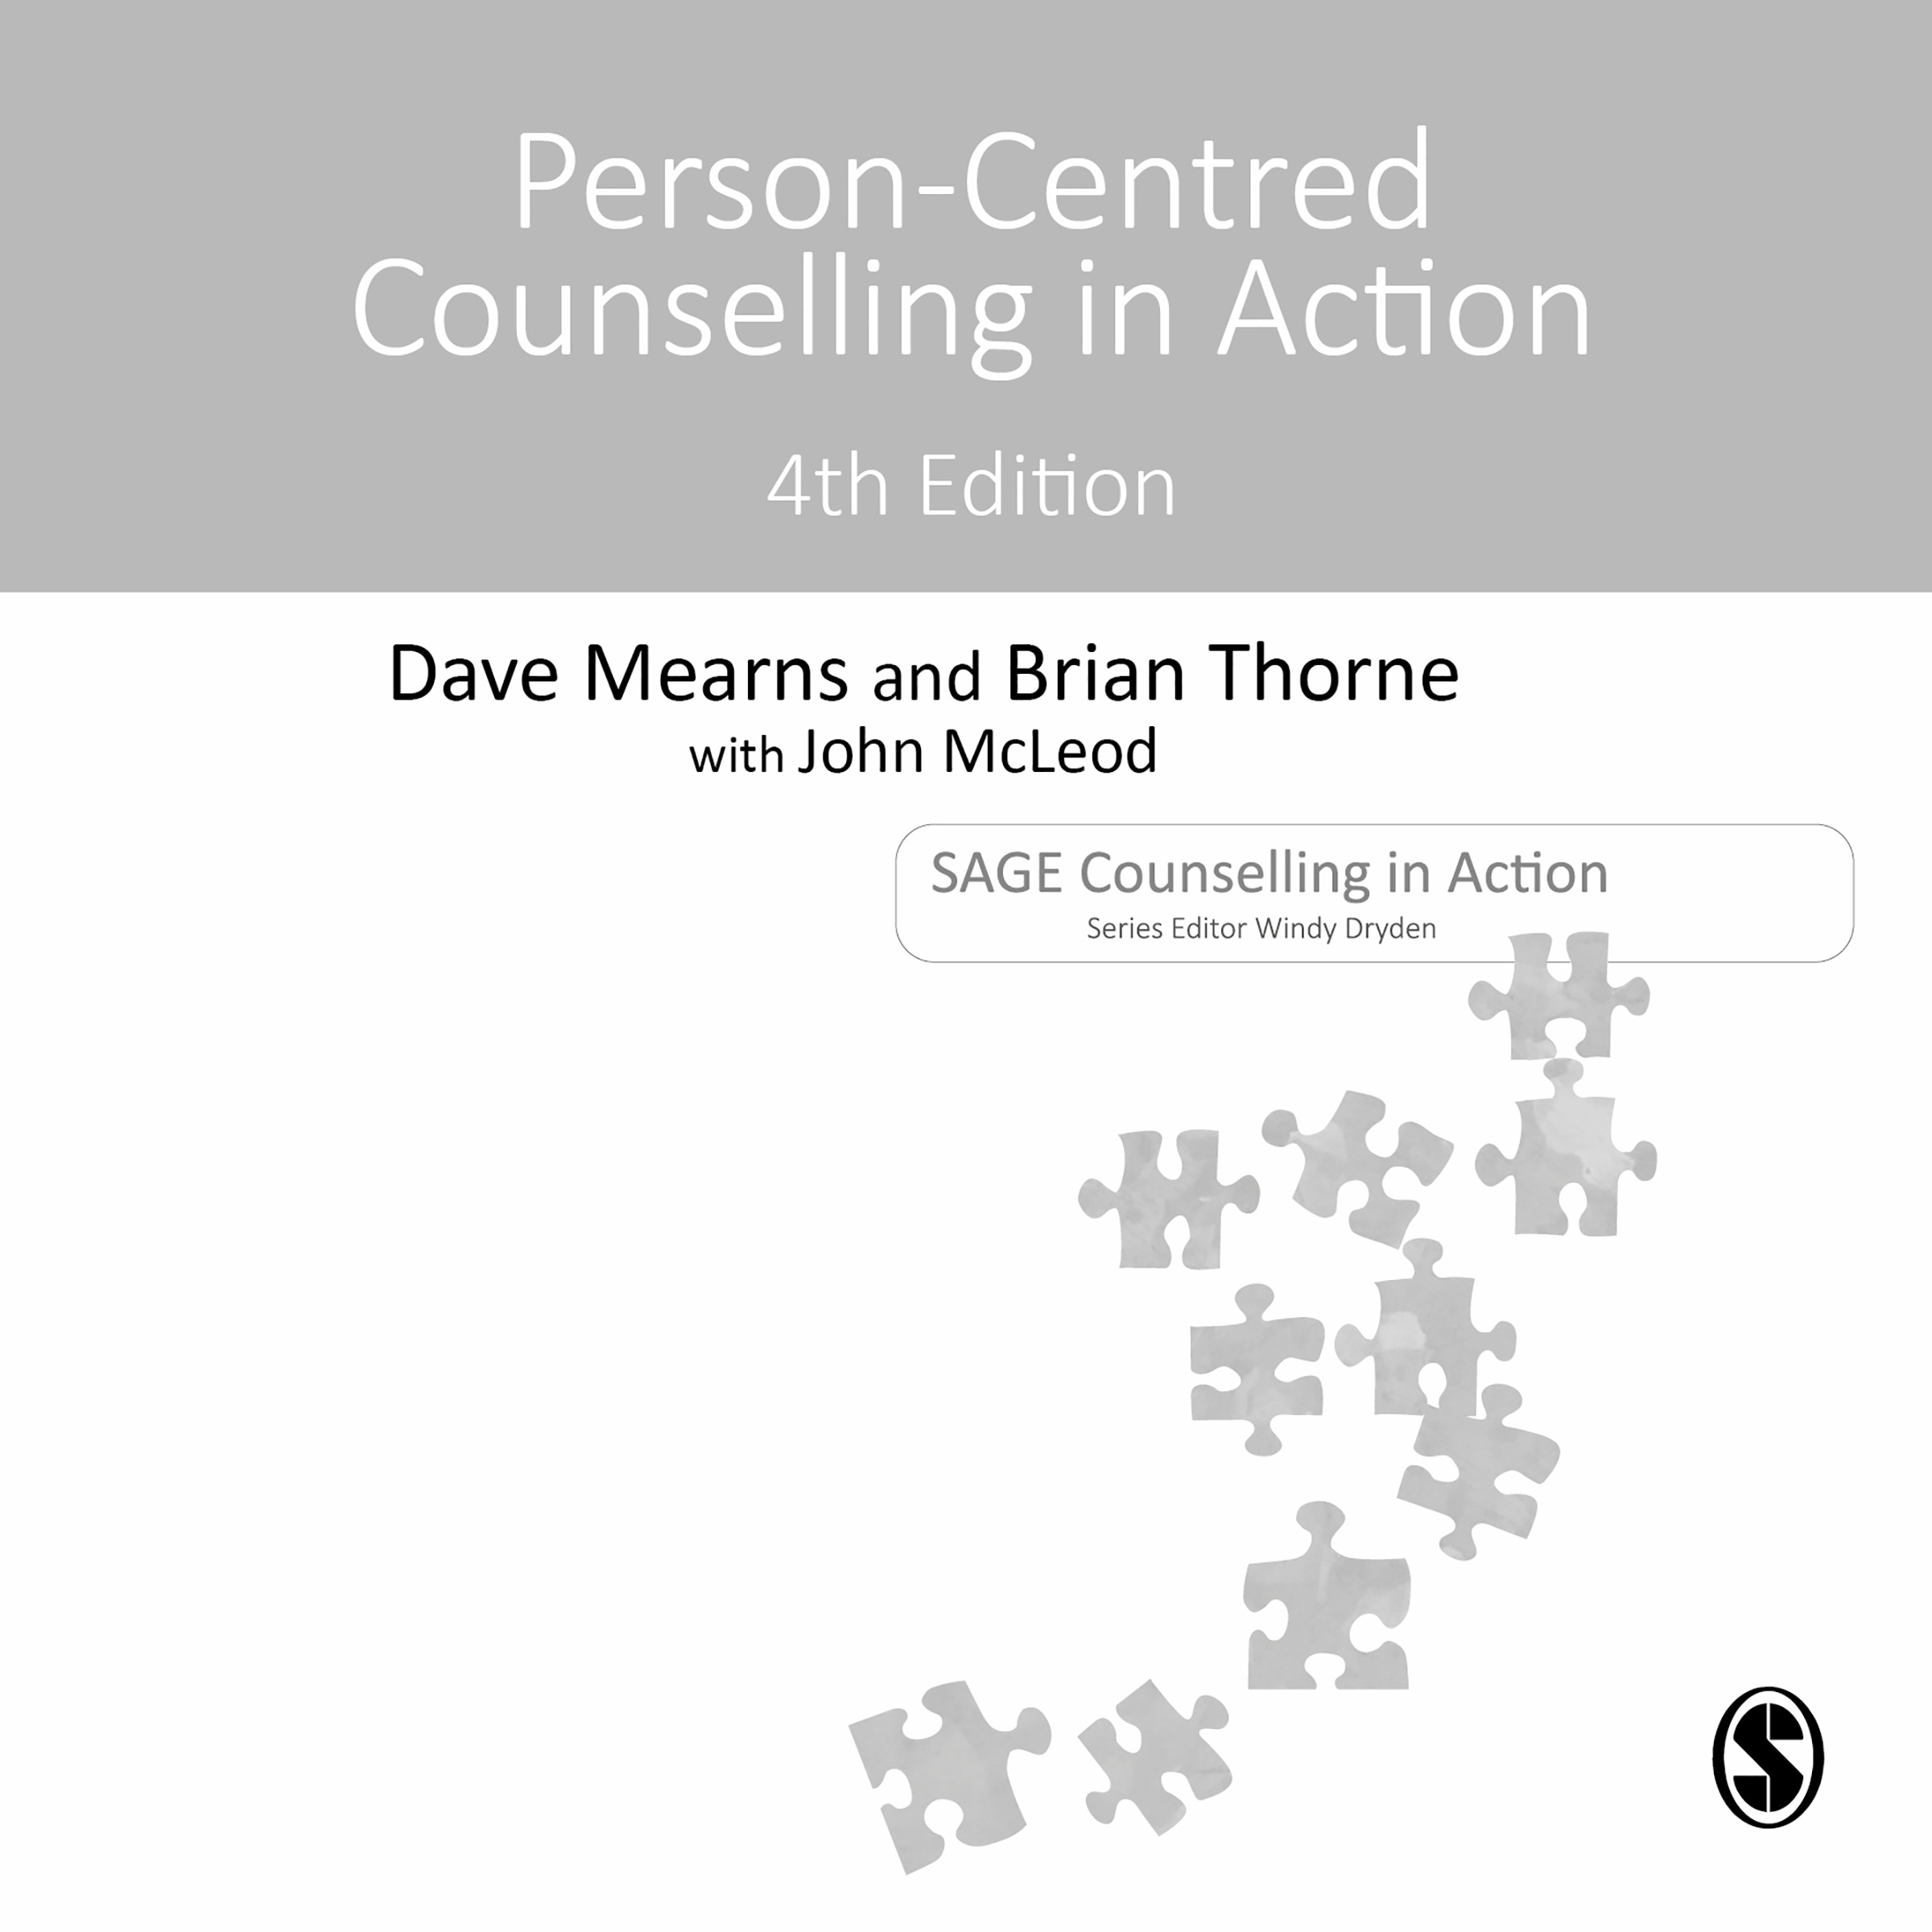 Person-Centred Counselling in Action image